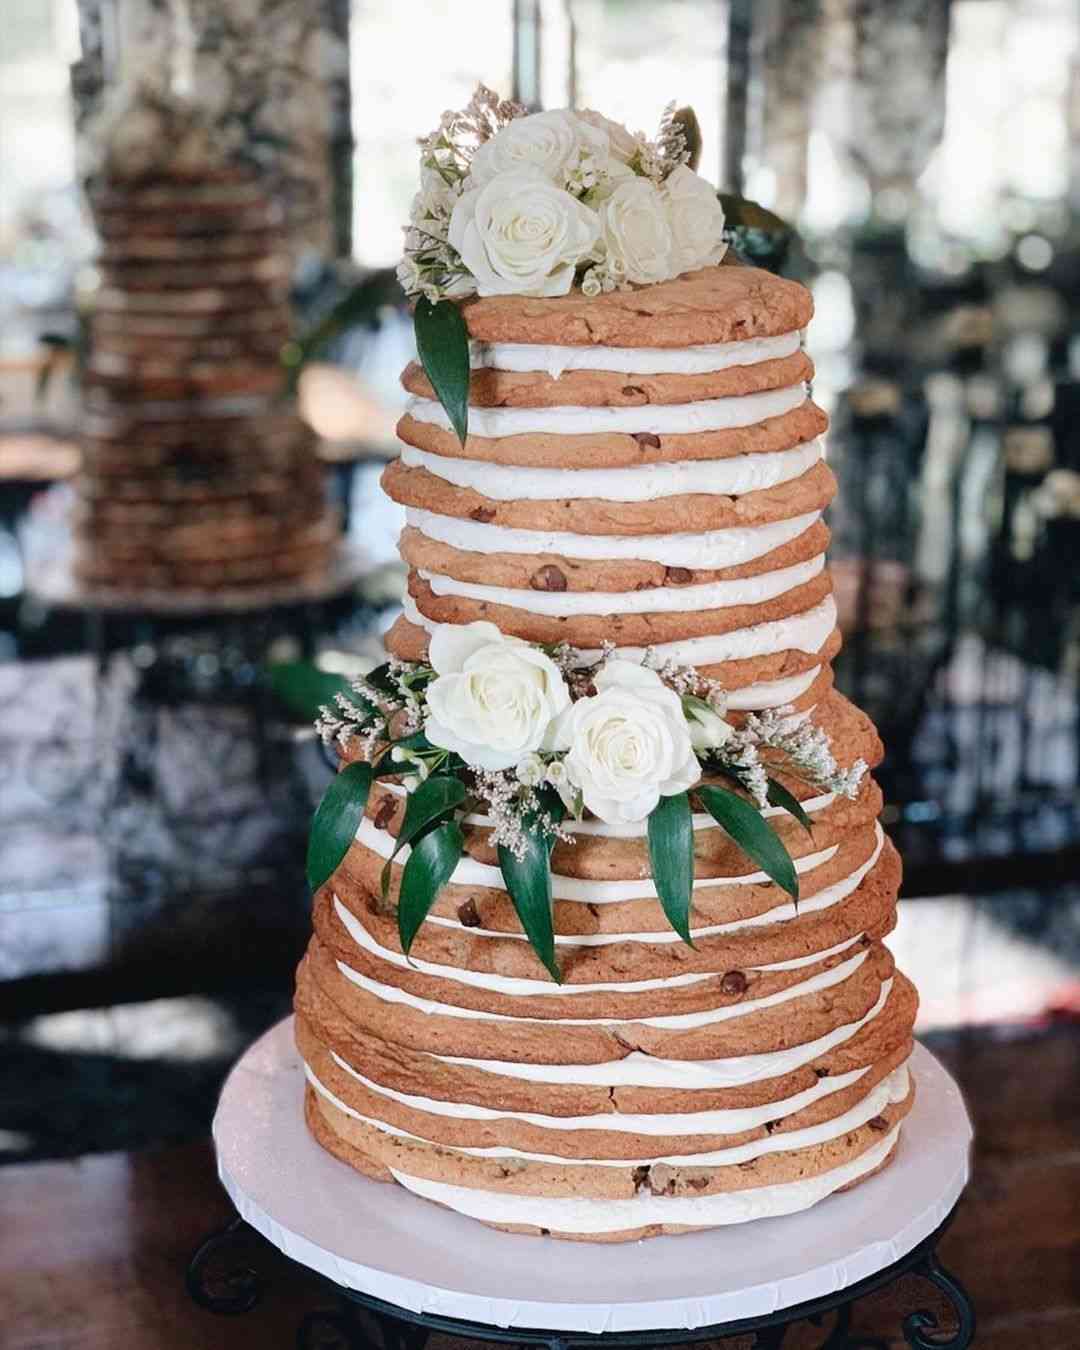 Wedding cookie cake with white roses